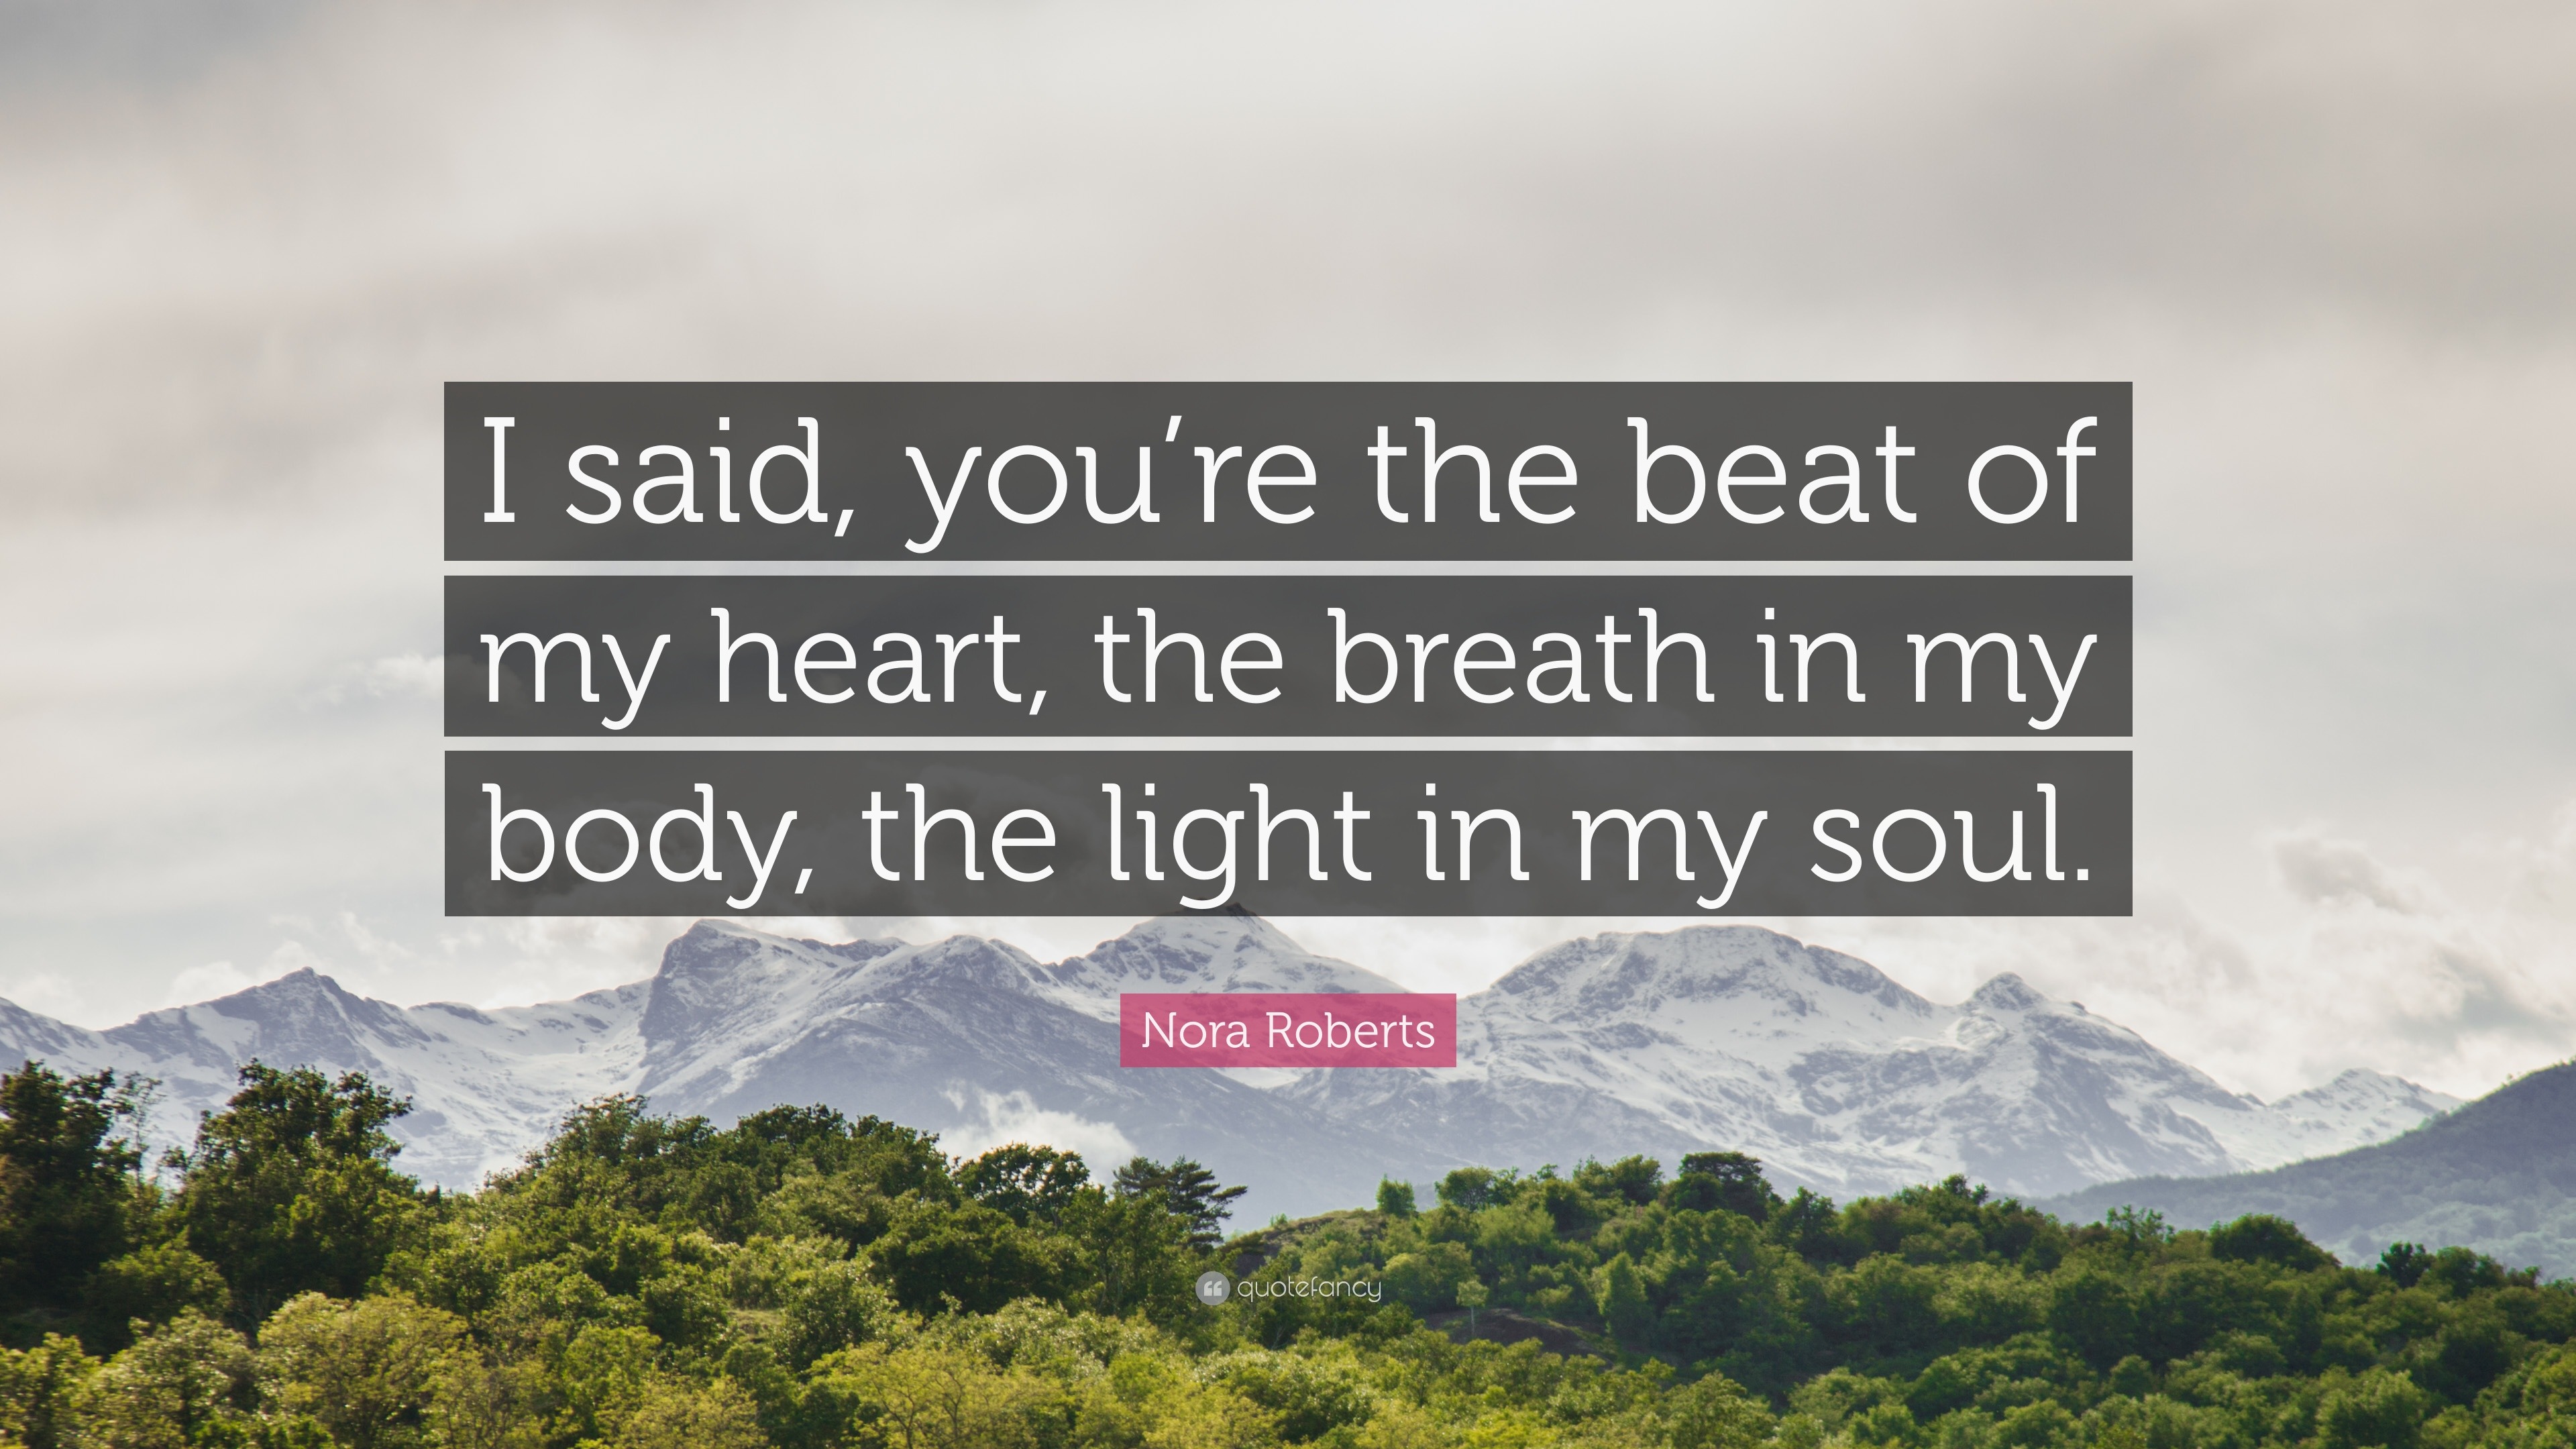 Blot gæld Sprællemand Nora Roberts Quote: “I said, you're the beat of my heart, the breath in my